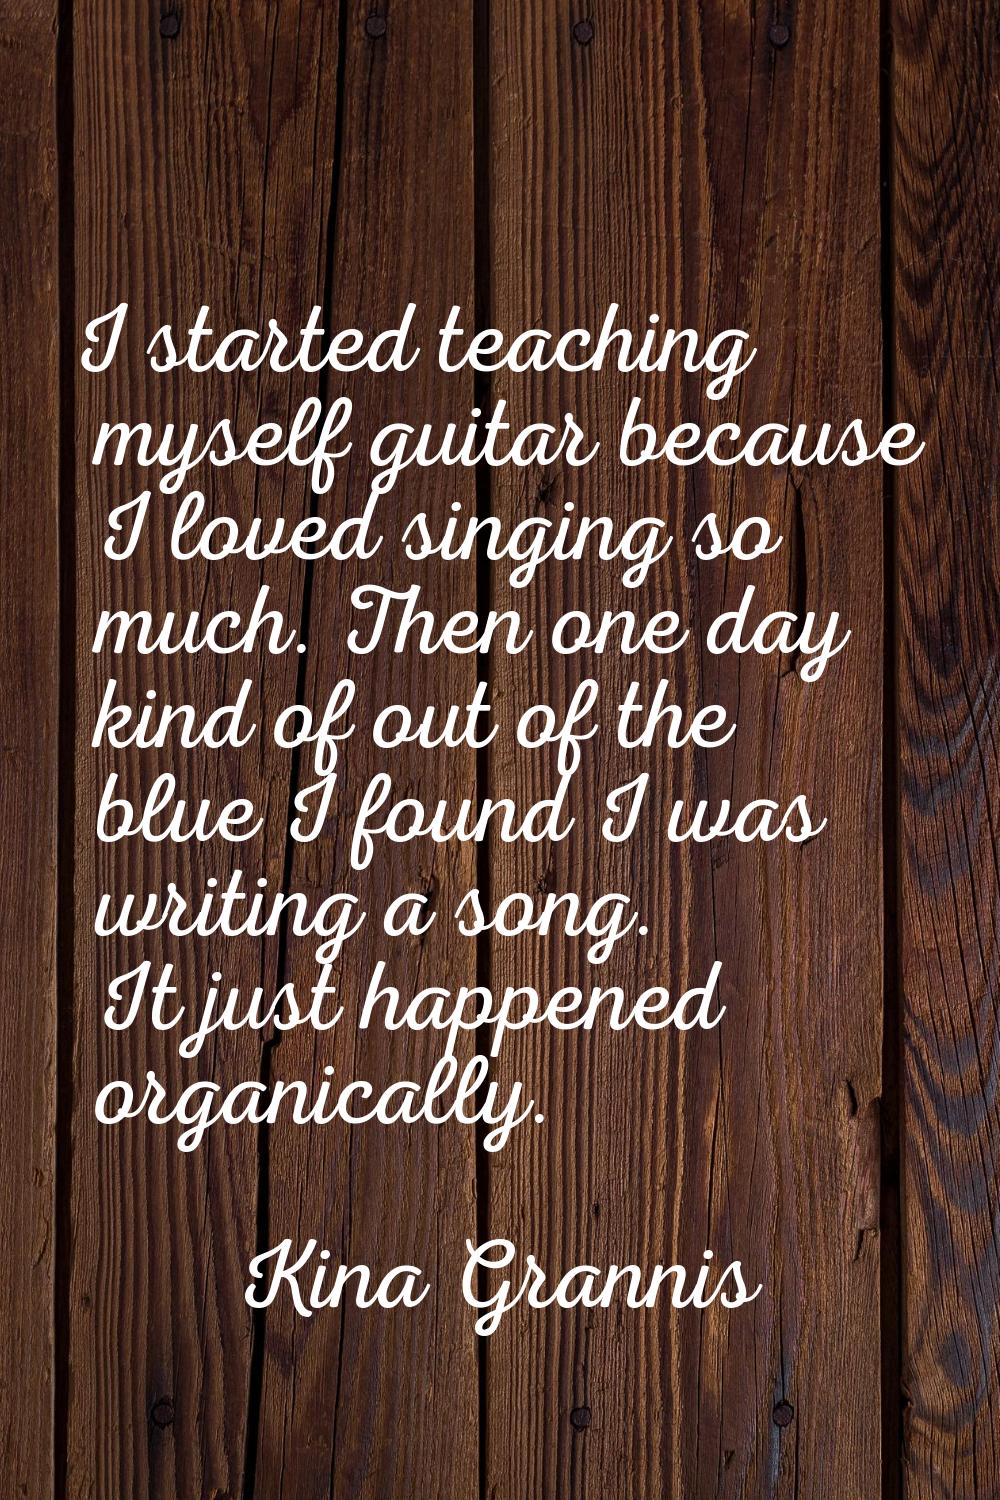 I started teaching myself guitar because I loved singing so much. Then one day kind of out of the b